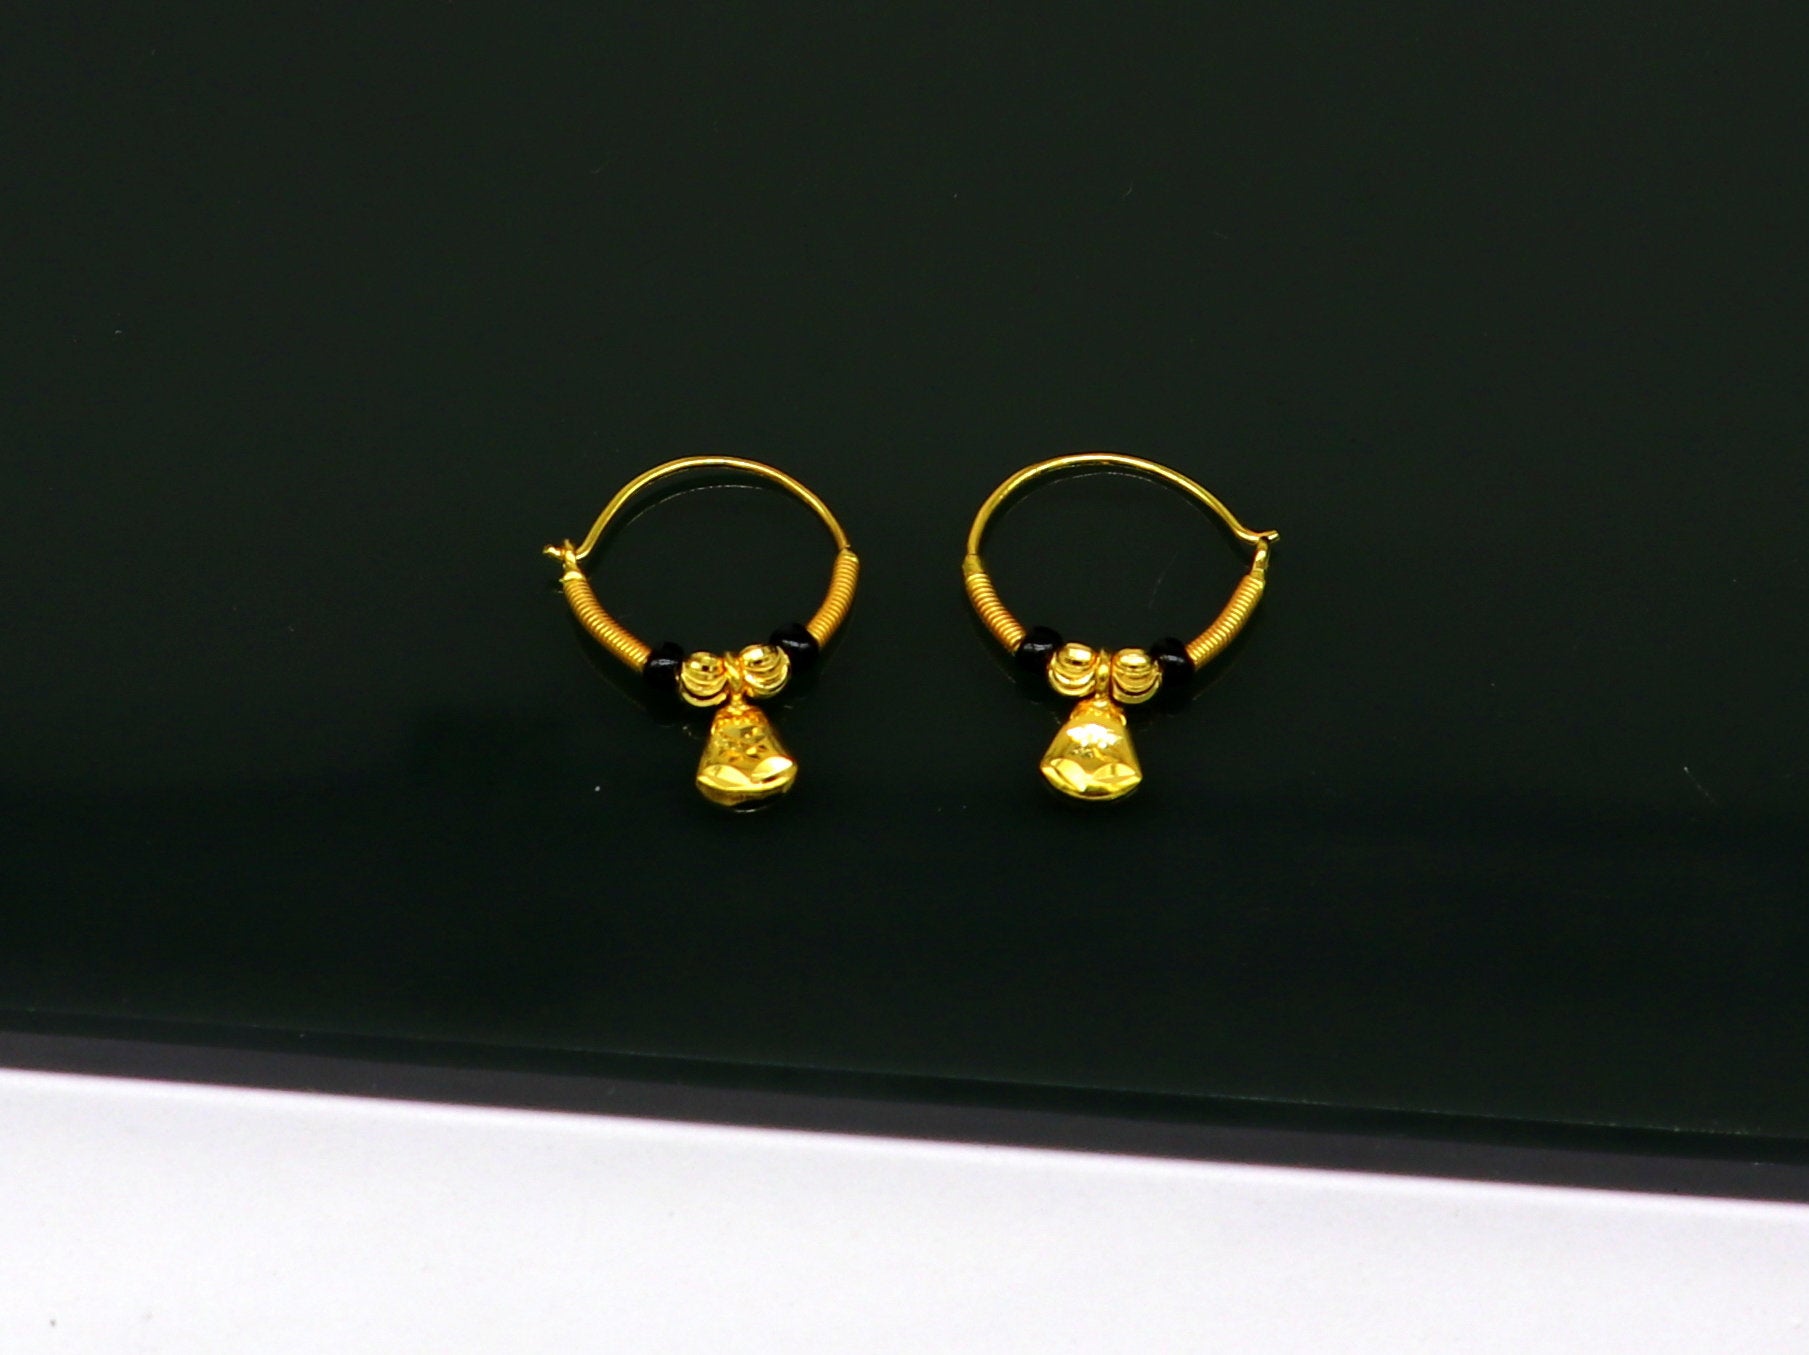 22 Carat Unique Small Bali Earrings, 1.46g at Rs 7000/pair in New Delhi |  ID: 14448944348